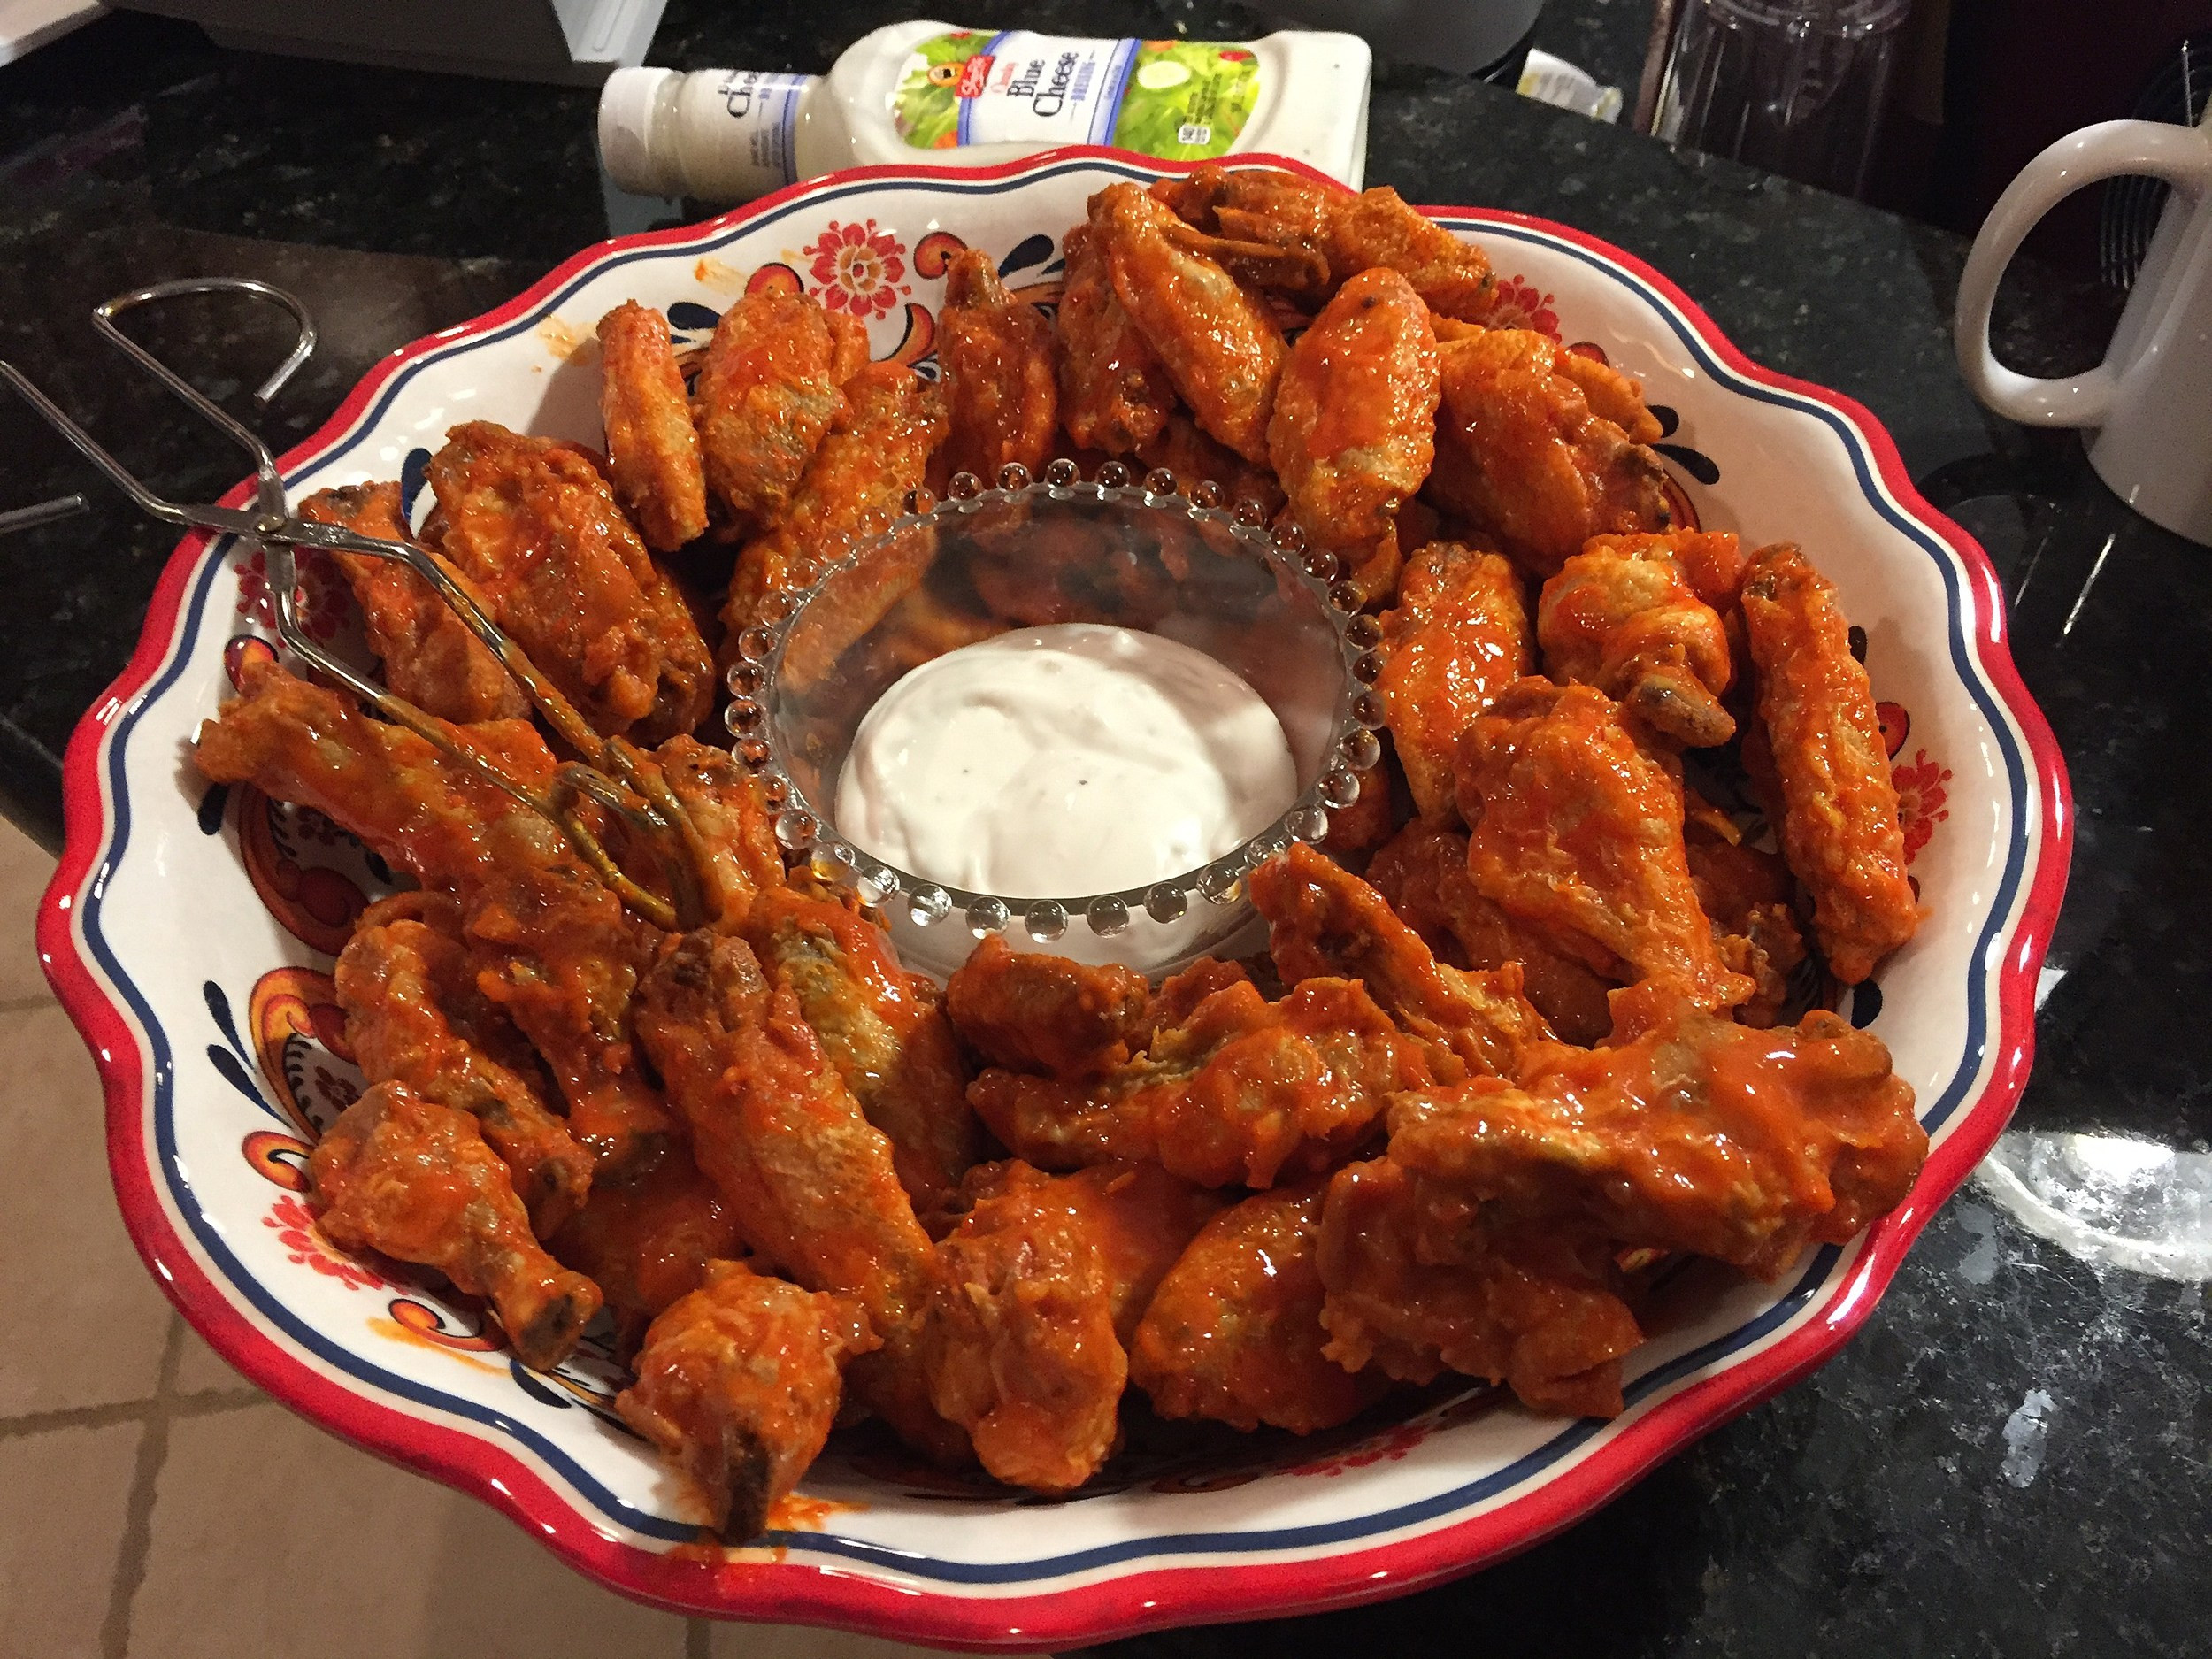 Super Bowl Chicken Wing Recipes
 A Super Bowl party staple — Kylie s can t miss chicken